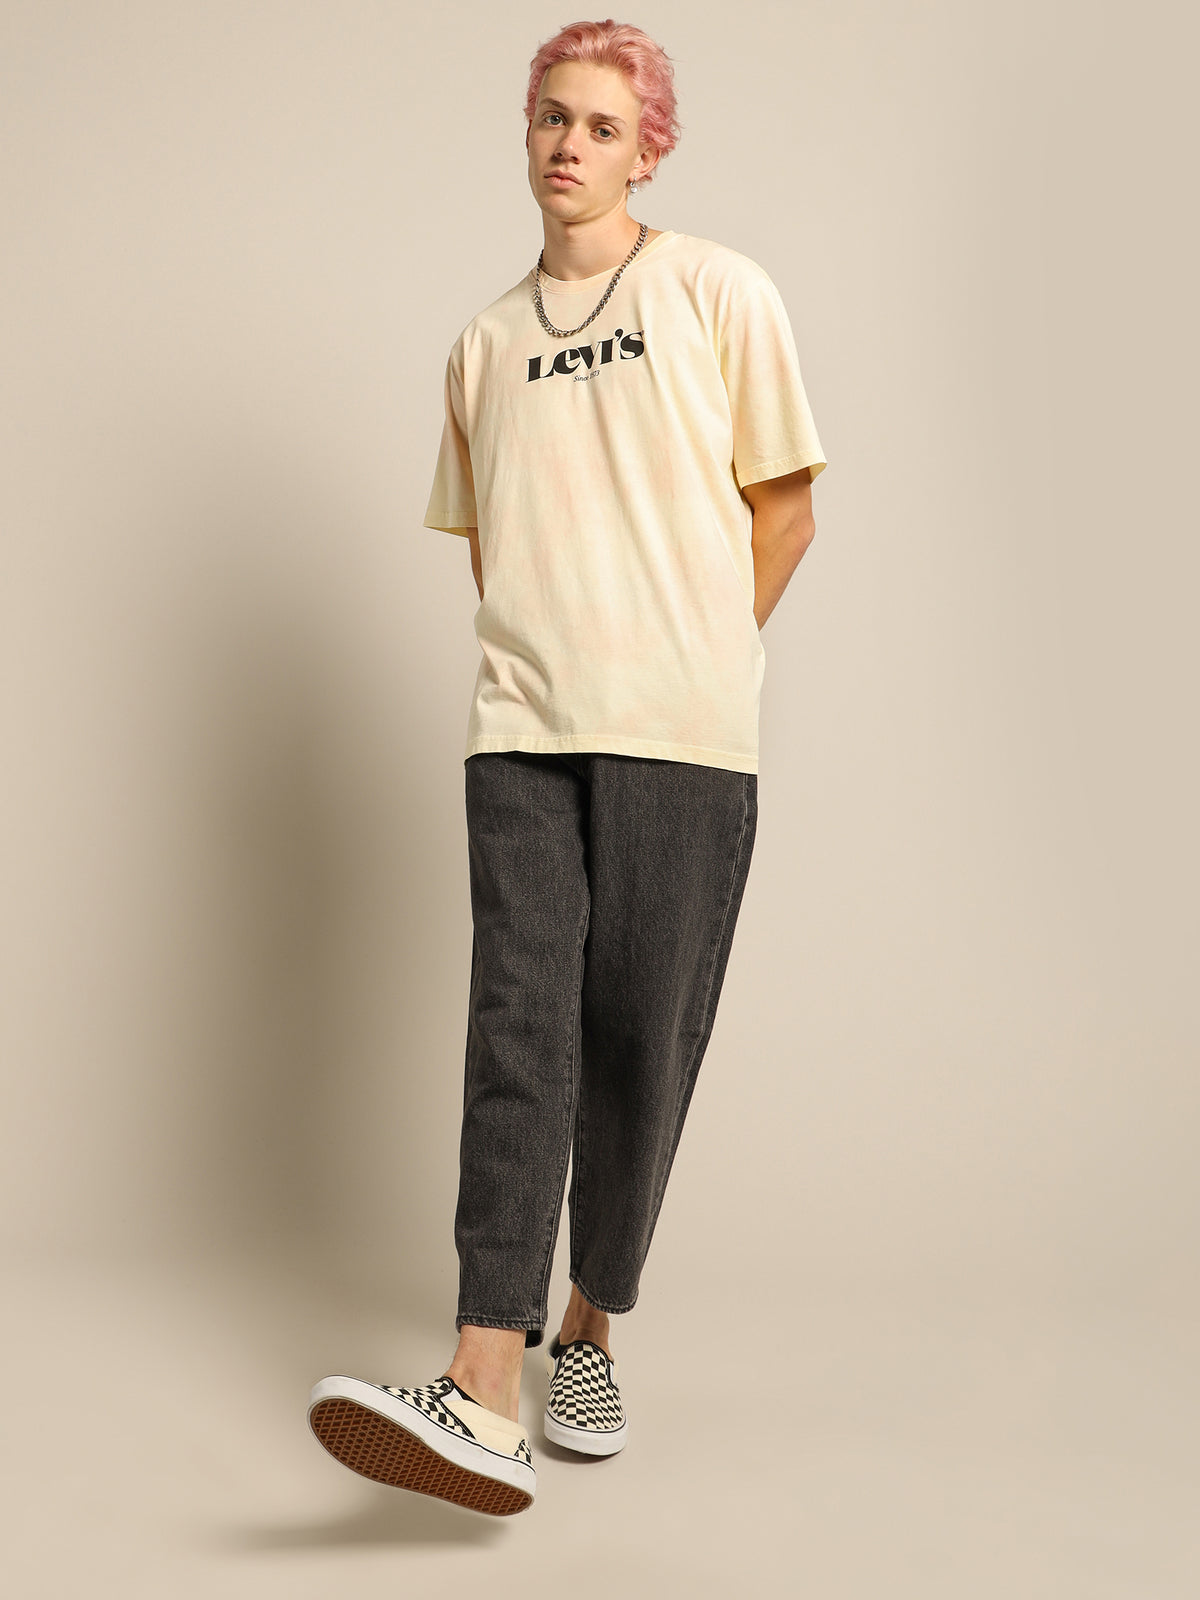 Relaxed Fit T-Shirt in Mv Logo Sprouts Dye